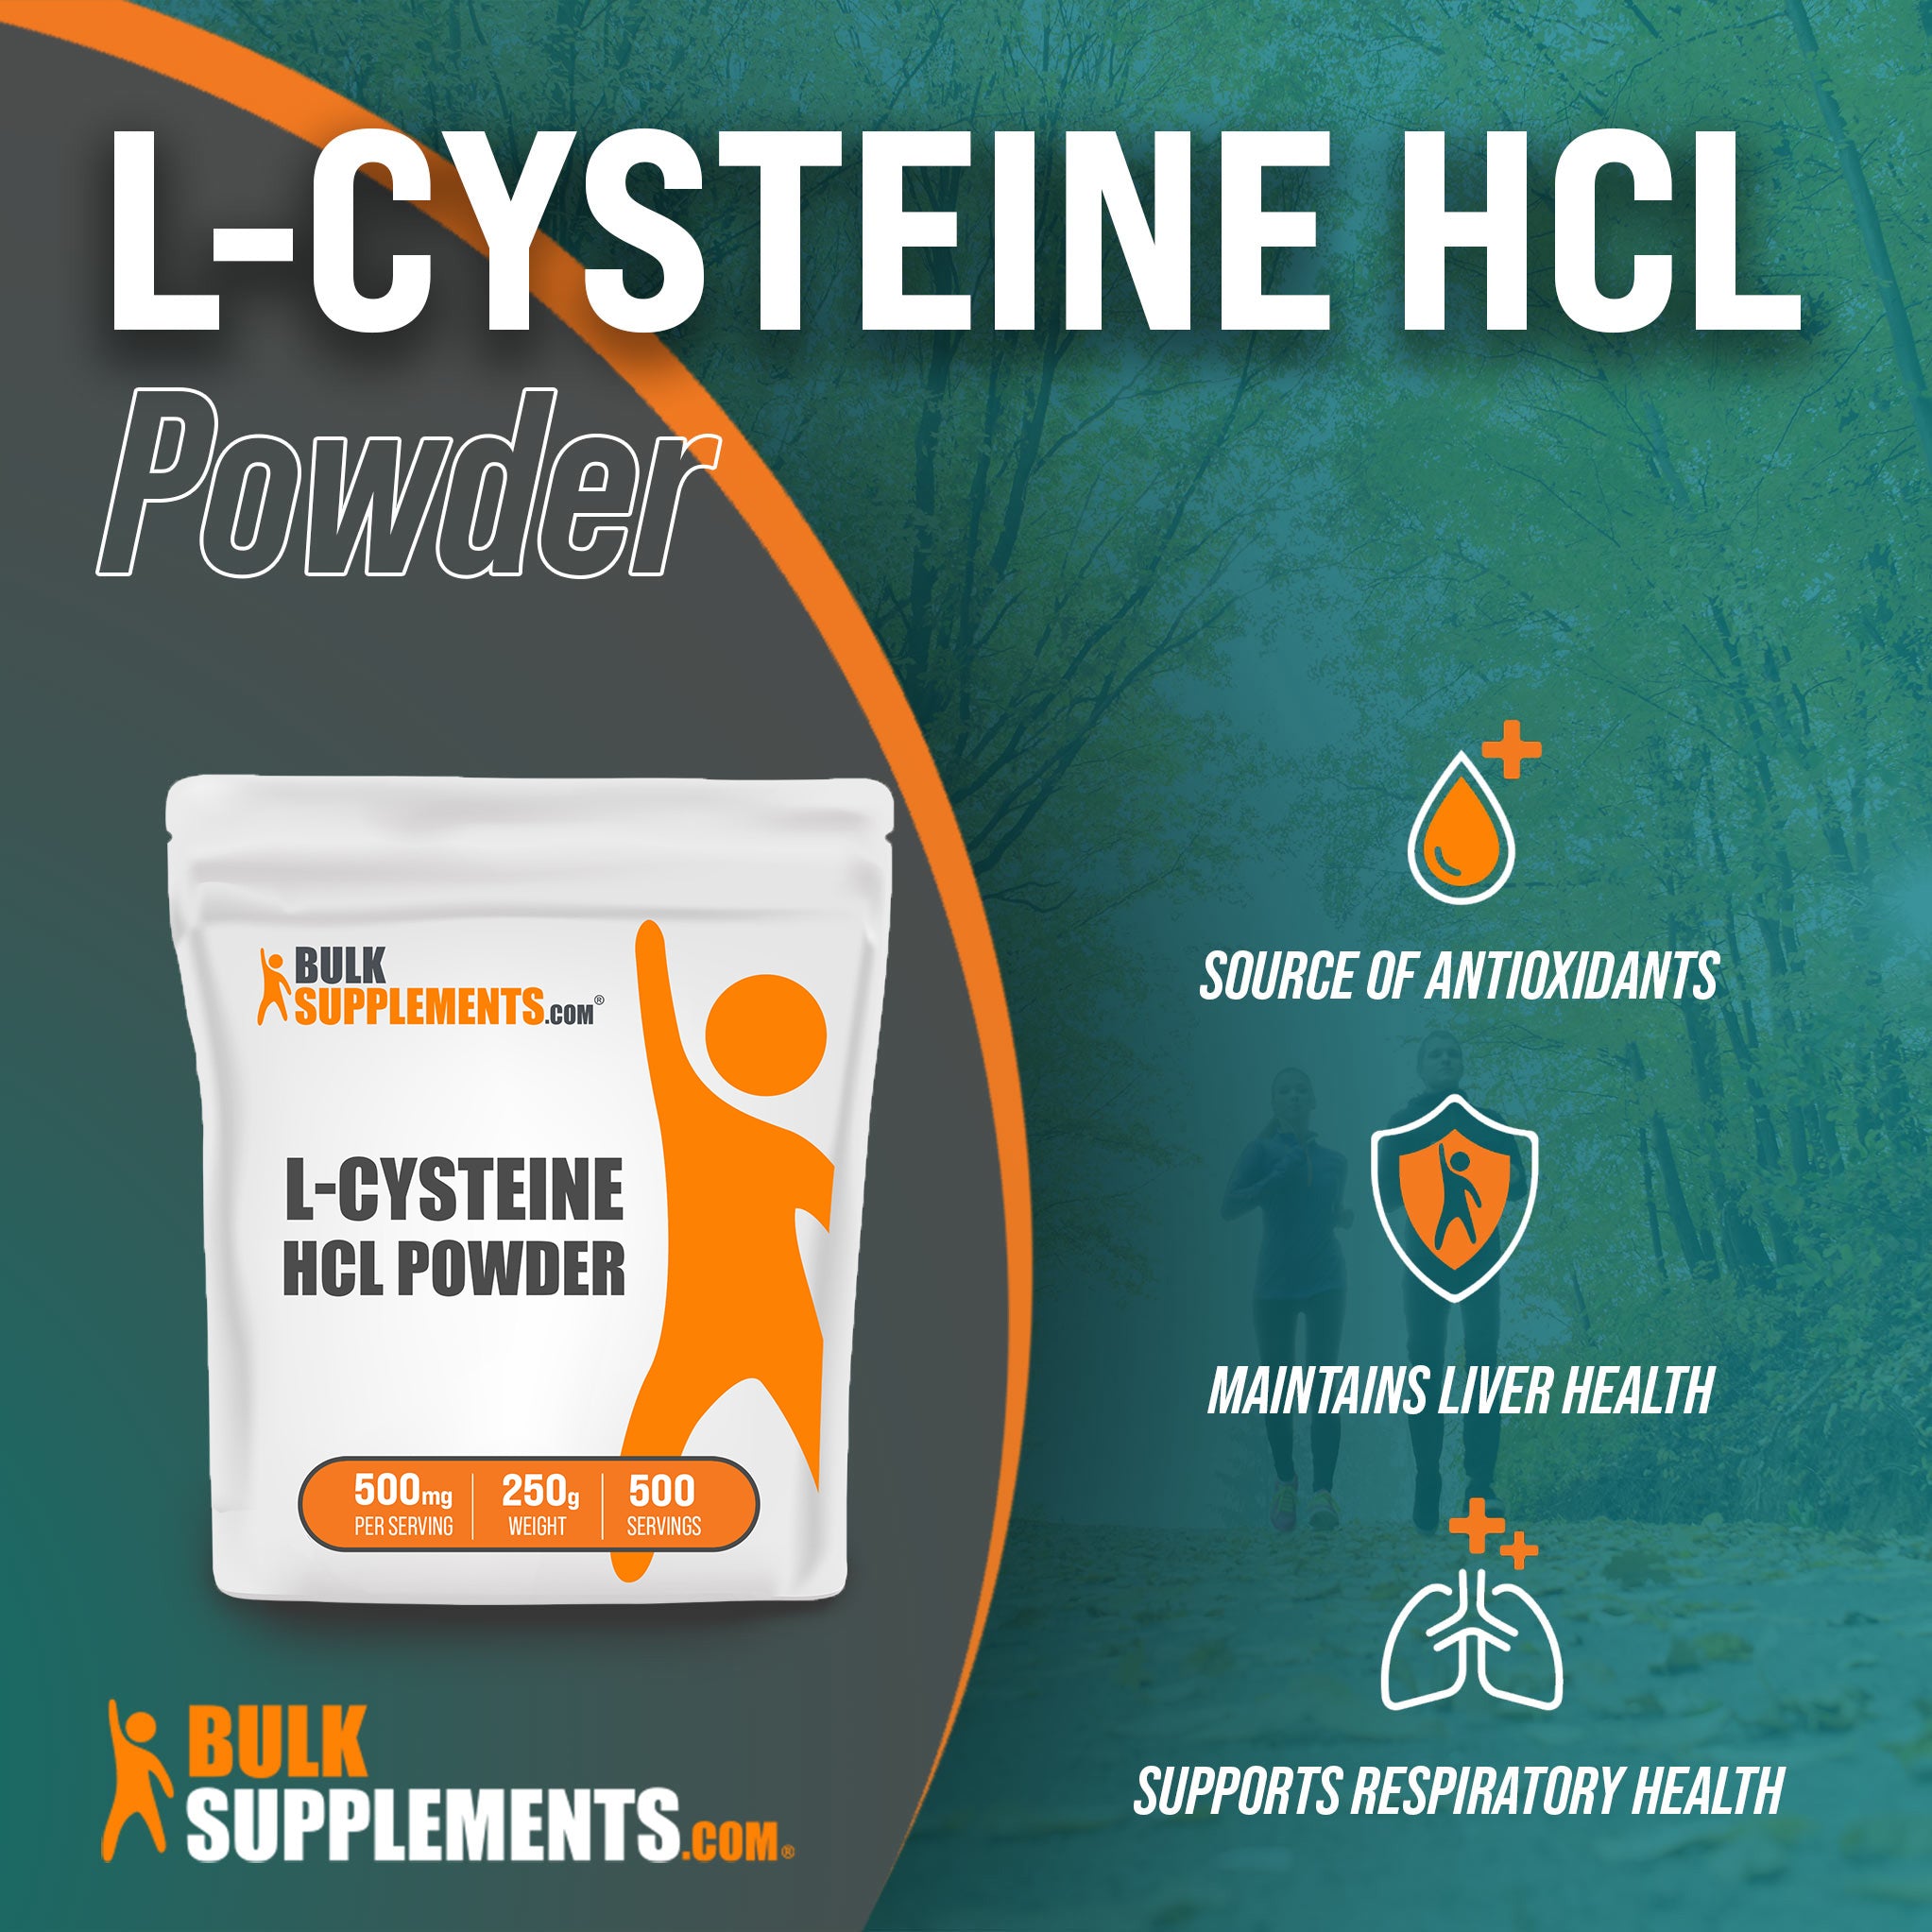 Benefits of L-Cysteine HCl: source of antioxidants, maintains liver health, supports respiratory health